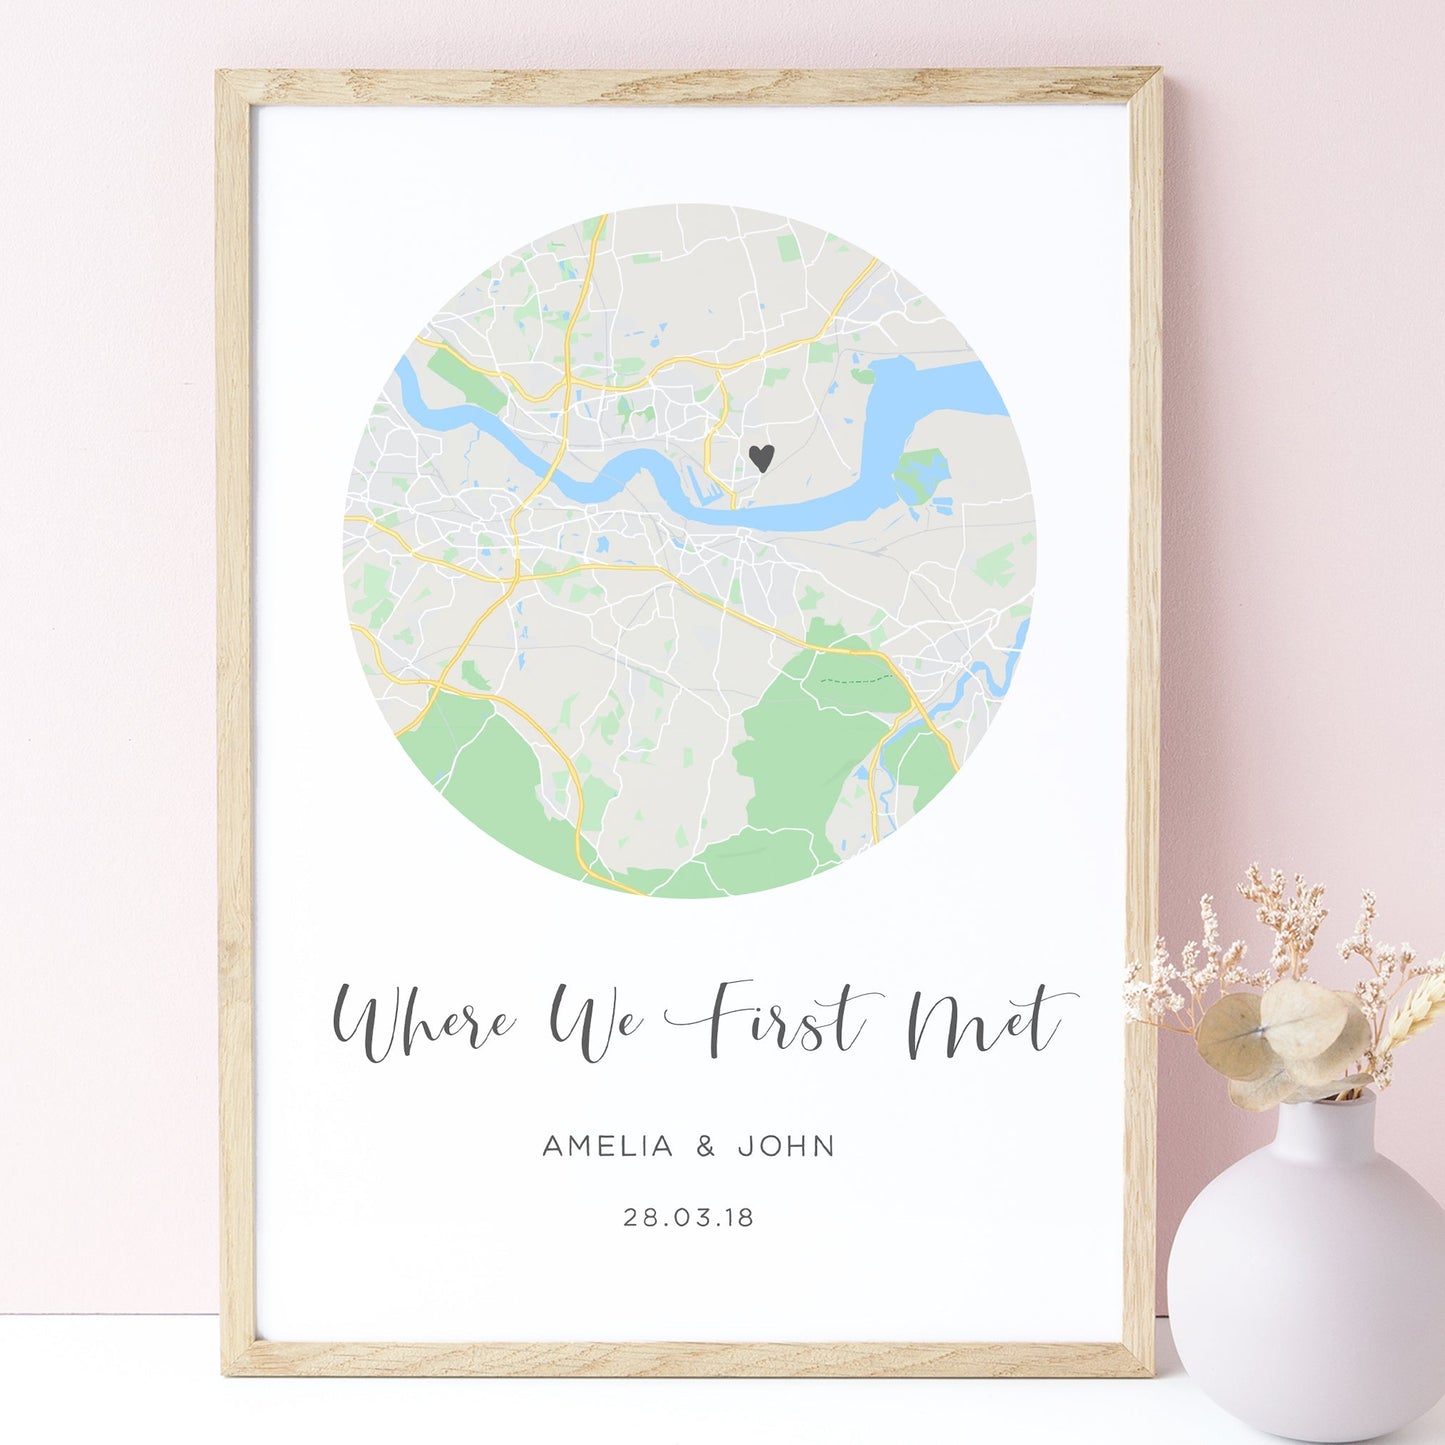 city map print personalised by location where we first met anniversary gift matte paperstock unframed